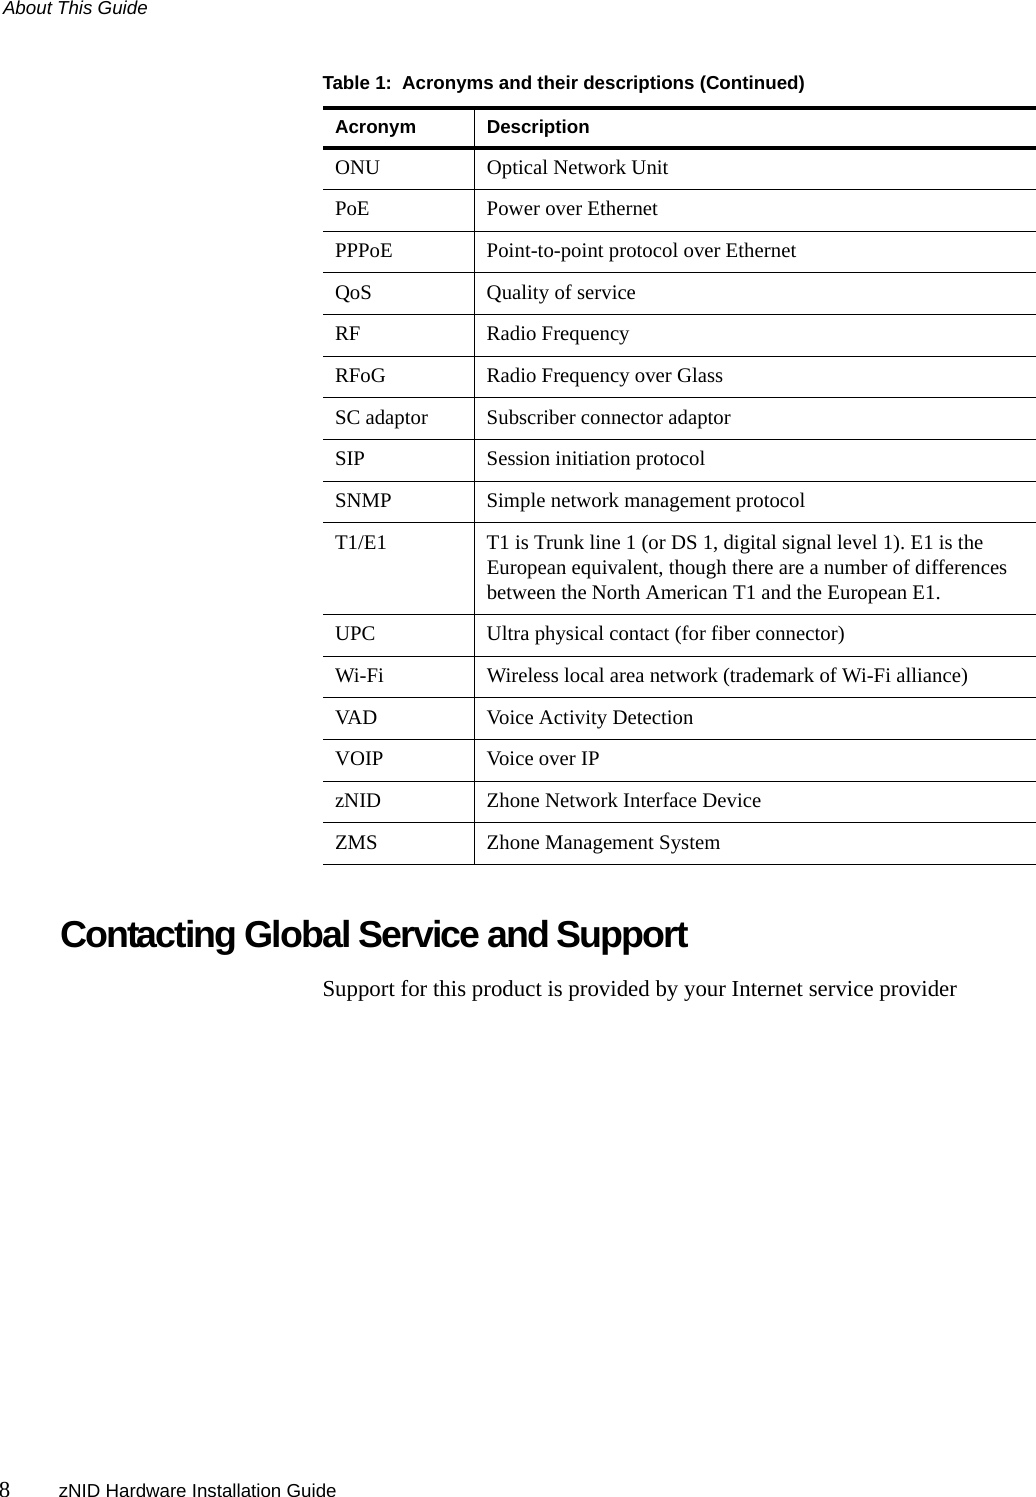 About This Guide8zNID Hardware Installation GuideContacting Global Service and SupportSupport for this product is provided by your Internet service providerONU Optical Network UnitPoE Power over EthernetPPPoE Point-to-point protocol over EthernetQoS Quality of serviceRF Radio FrequencyRFoG Radio Frequency over GlassSC adaptor Subscriber connector adaptorSIP Session initiation protocolSNMP Simple network management protocolT1/E1 T1 is Trunk line 1 (or DS 1, digital signal level 1). E1 is the European equivalent, though there are a number of differences between the North American T1 and the European E1.UPC Ultra physical contact (for fiber connector)Wi-Fi Wireless local area network (trademark of Wi-Fi alliance)VAD Voice Activity DetectionVOIP Voice over IPzNID Zhone Network Interface DeviceZMS Zhone Management SystemTable 1:  Acronyms and their descriptions (Continued)Acronym Description